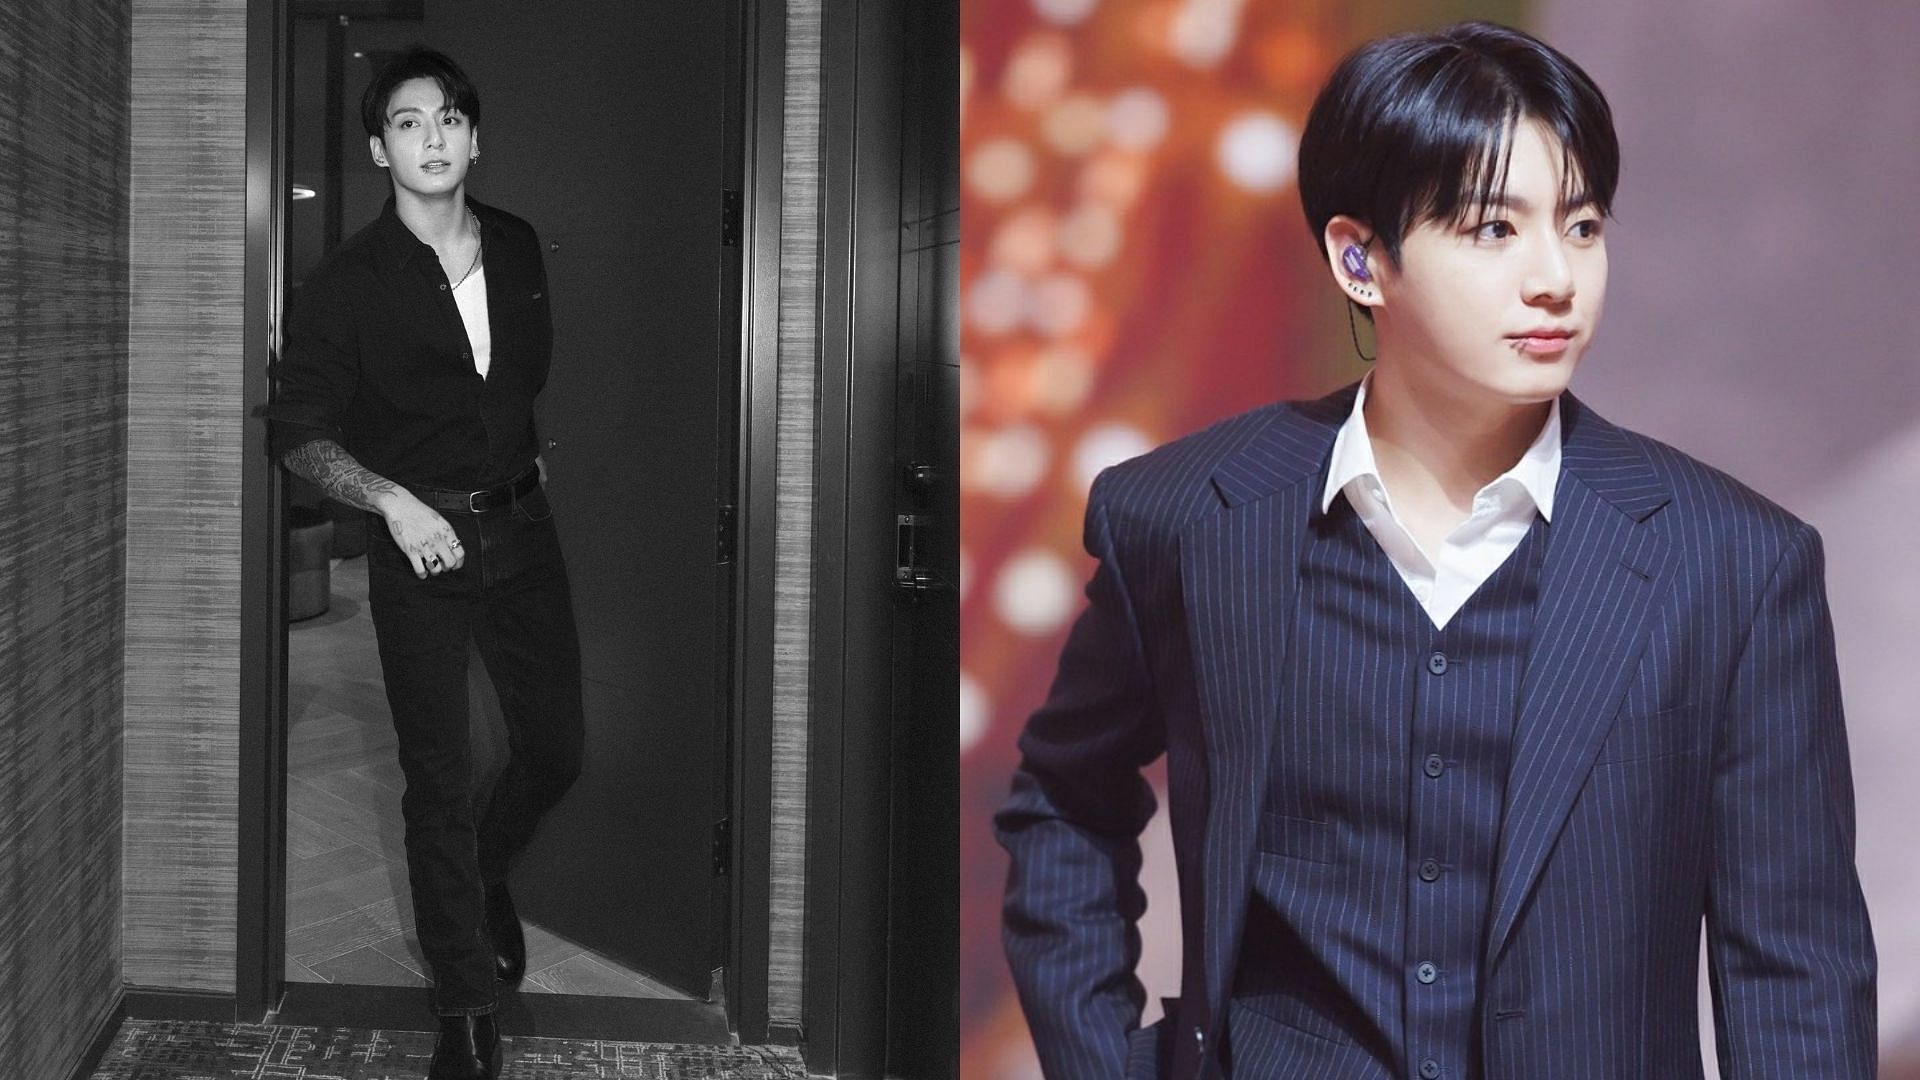 “King Kook indeed”: Fans enraptured as BTS’ Jungkook becomes the first ...